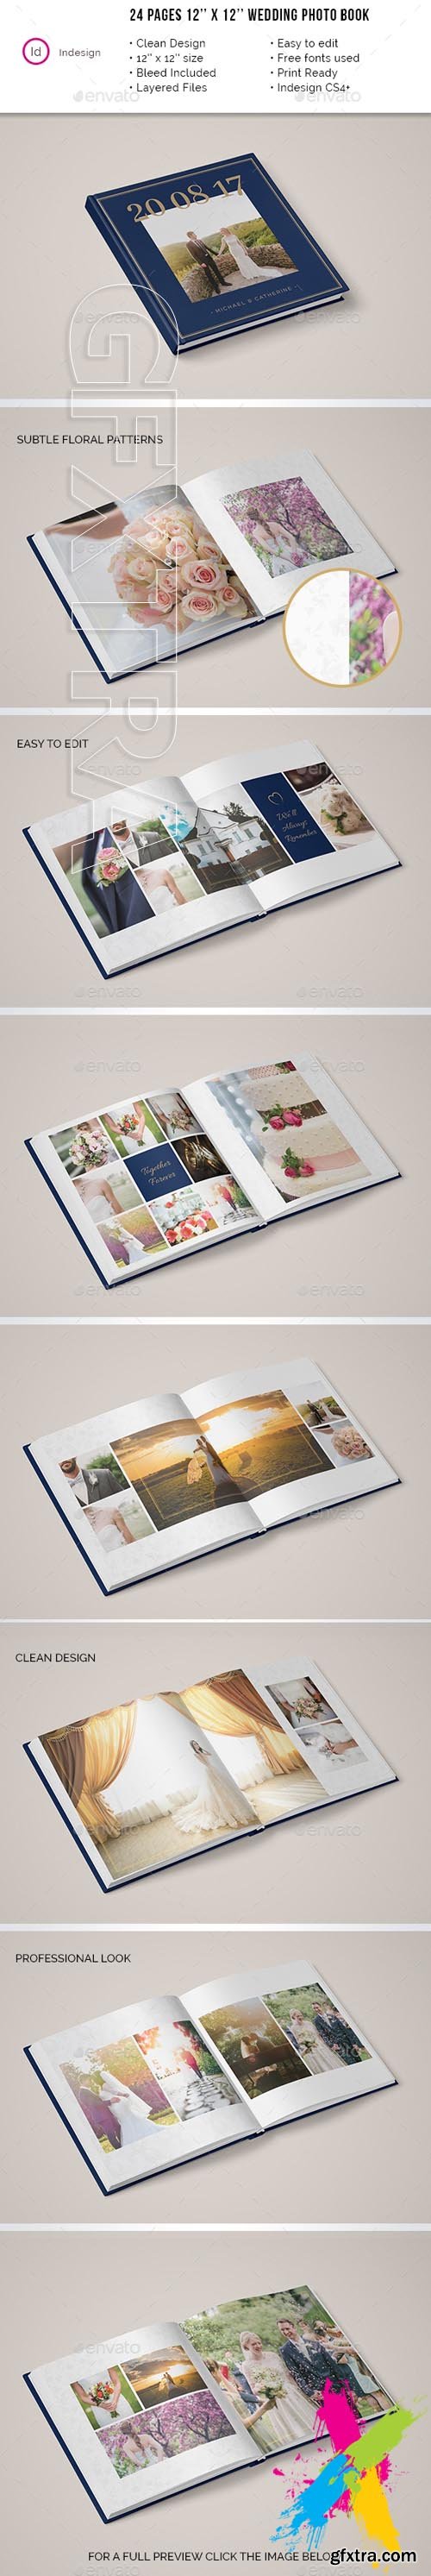 Graphicriver - 24 pages Wedding Photobook 12x12 Brochure 20196859